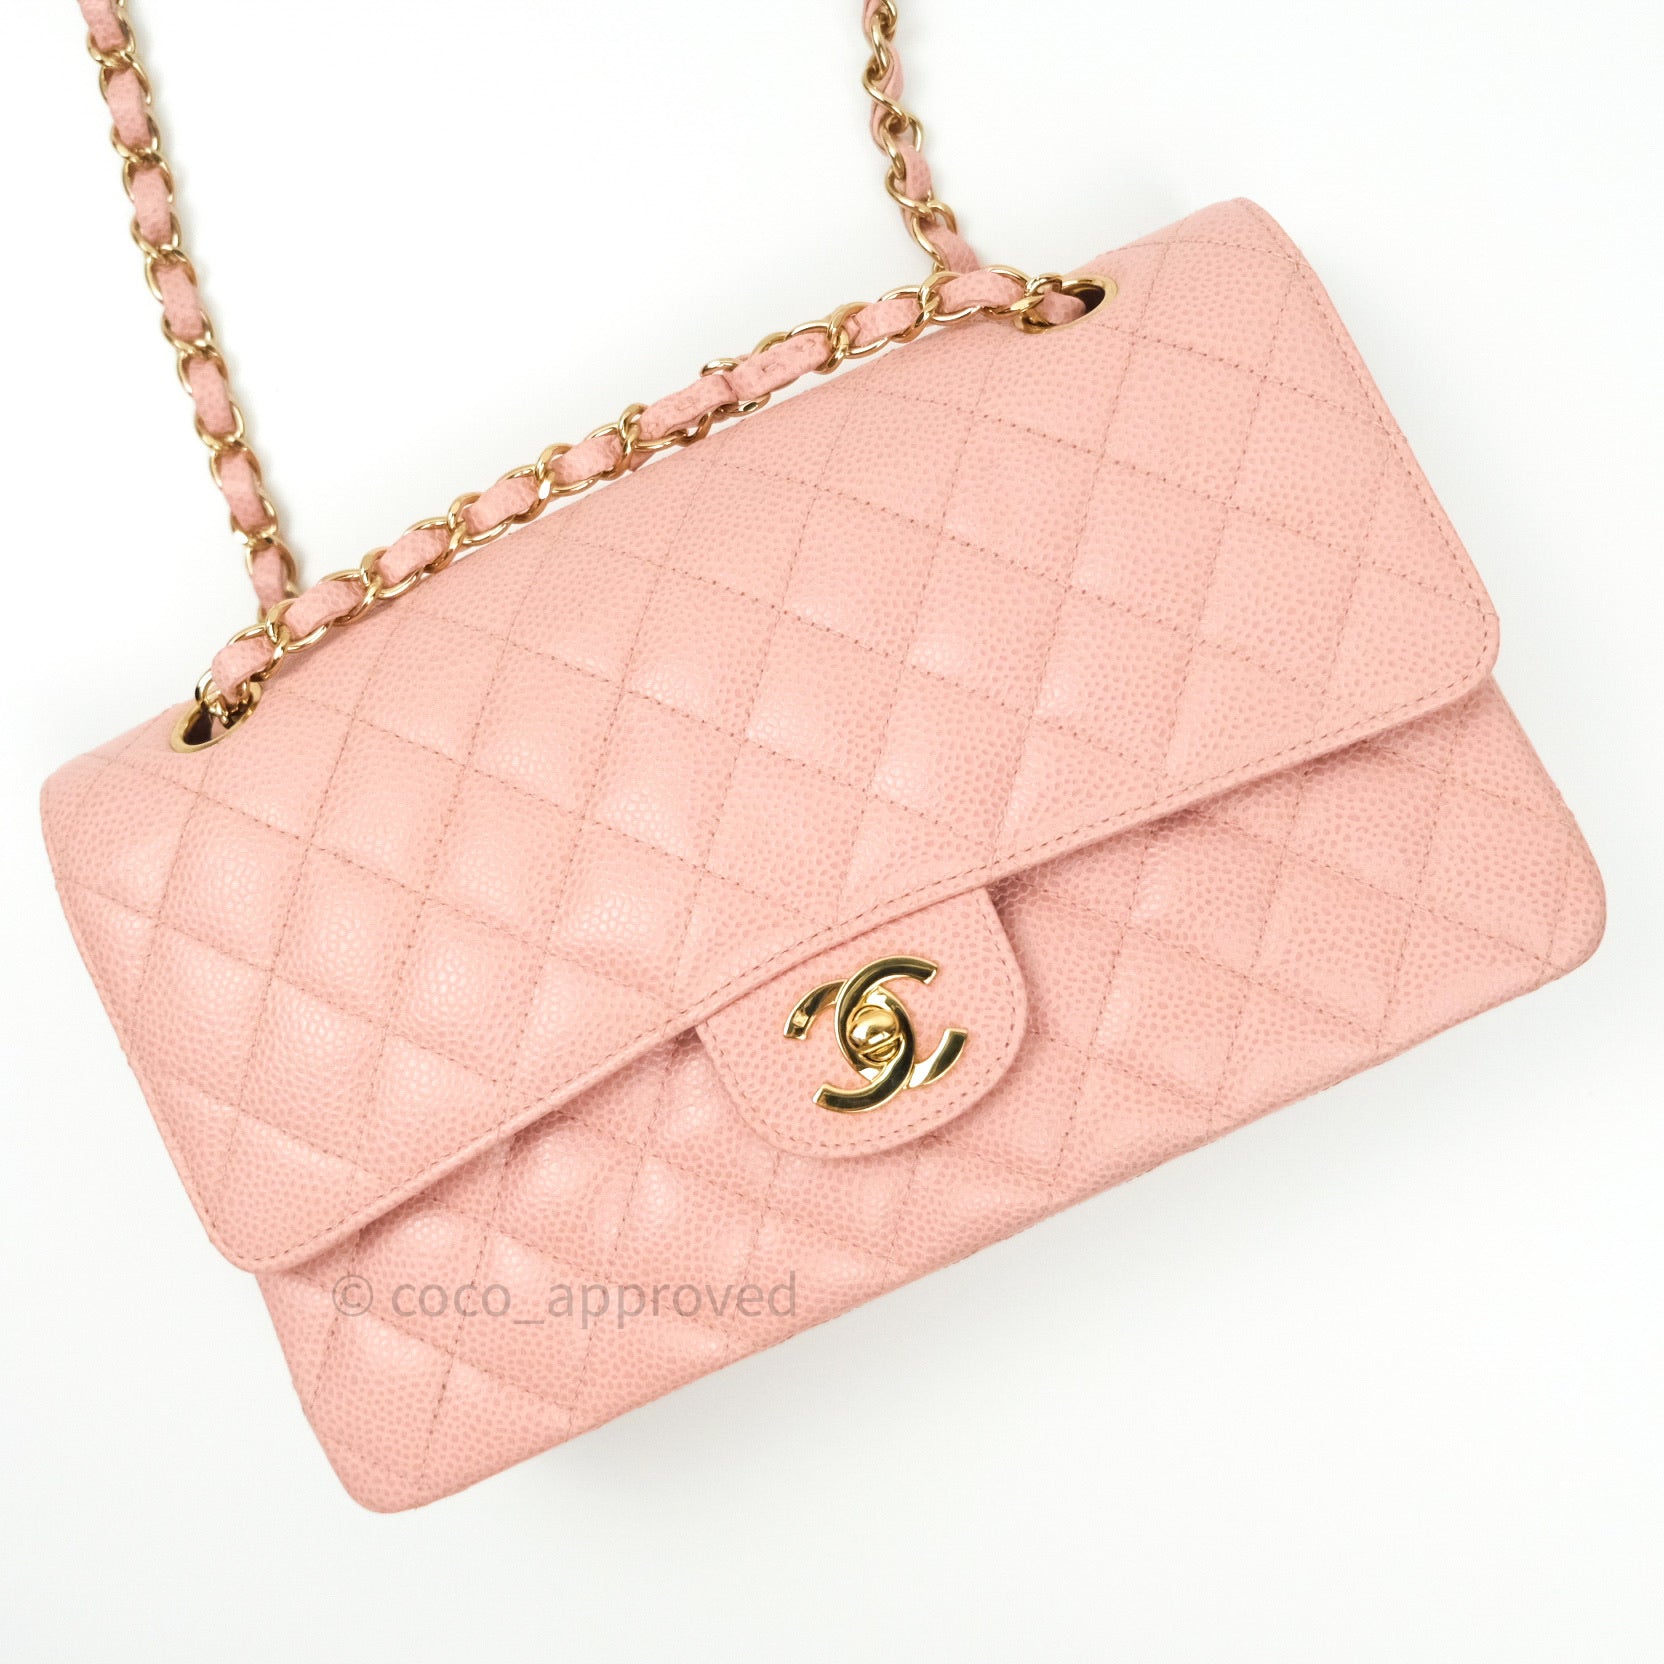 pink classic chanel bag